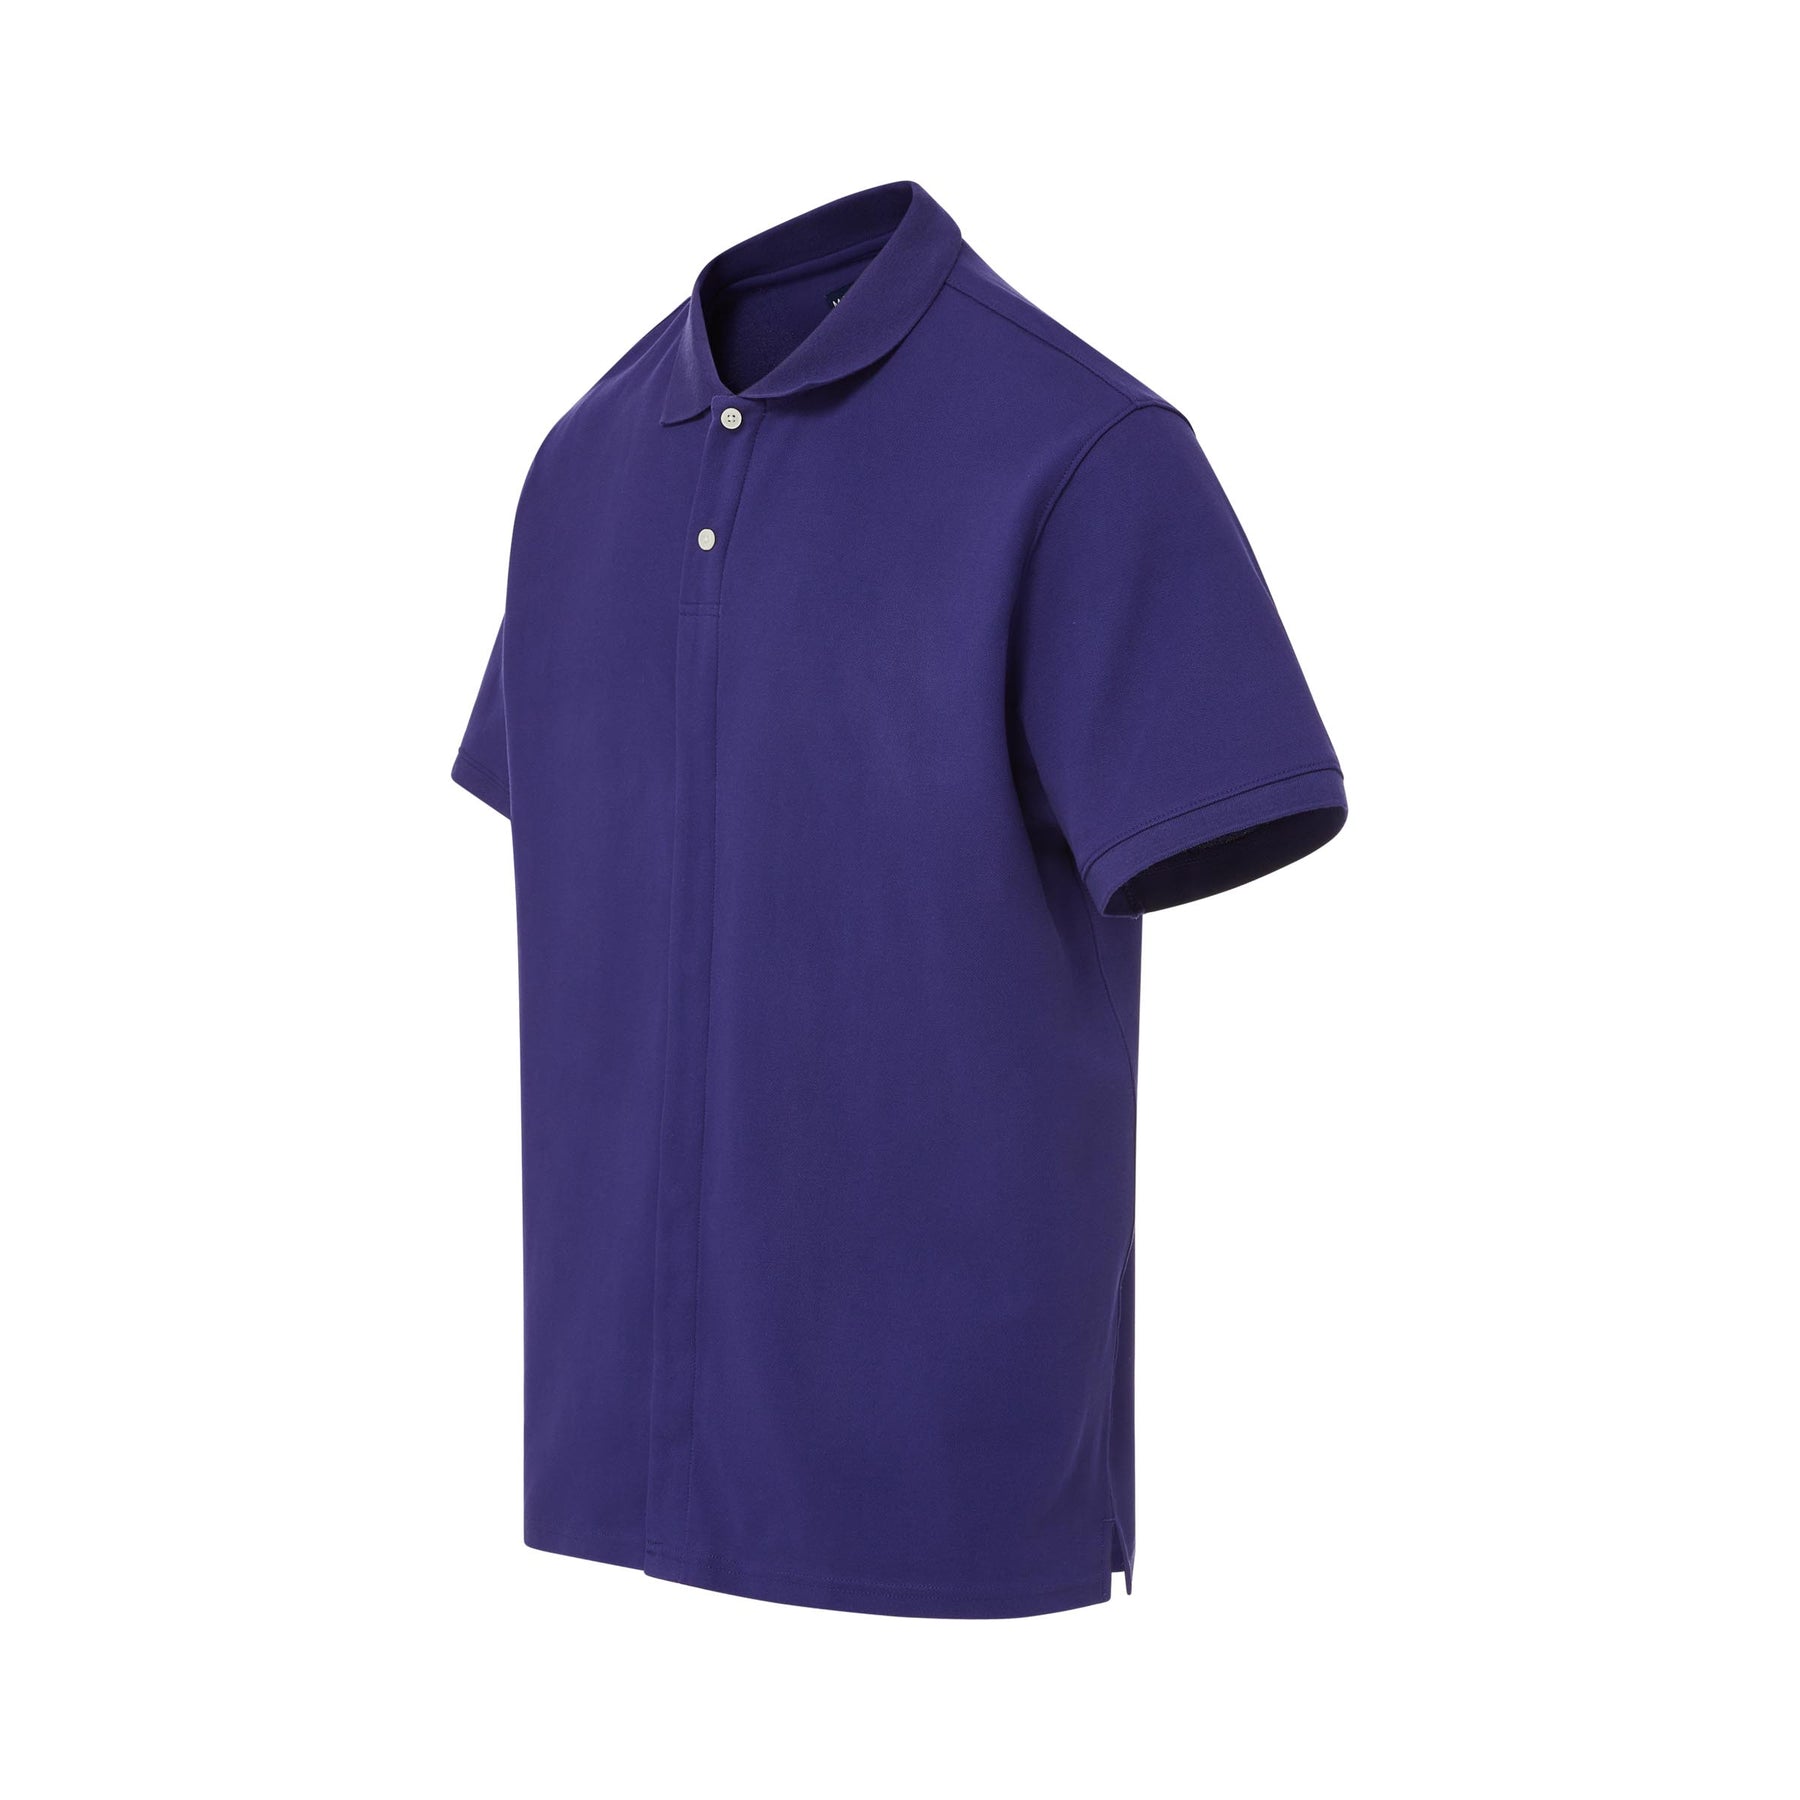 Navy Pique Knit Short Sleeve Polo with Magnetic Closures